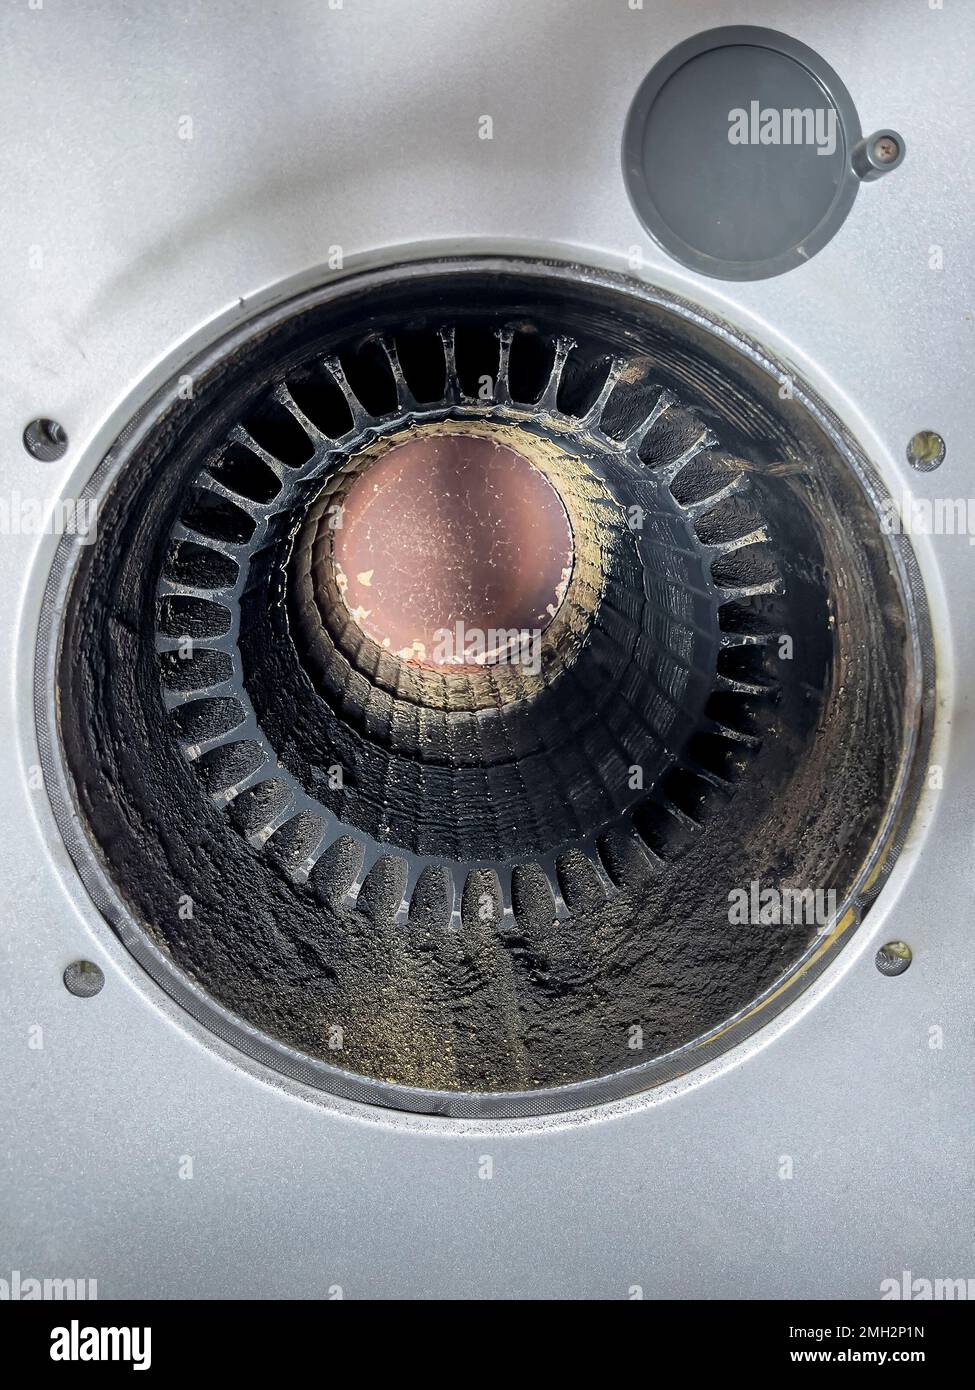 Opened combustion chamber of an oil heating system. The combustion chamber has been cleaned of soot and residues. Traces of the brush used can be seen Stock Photo